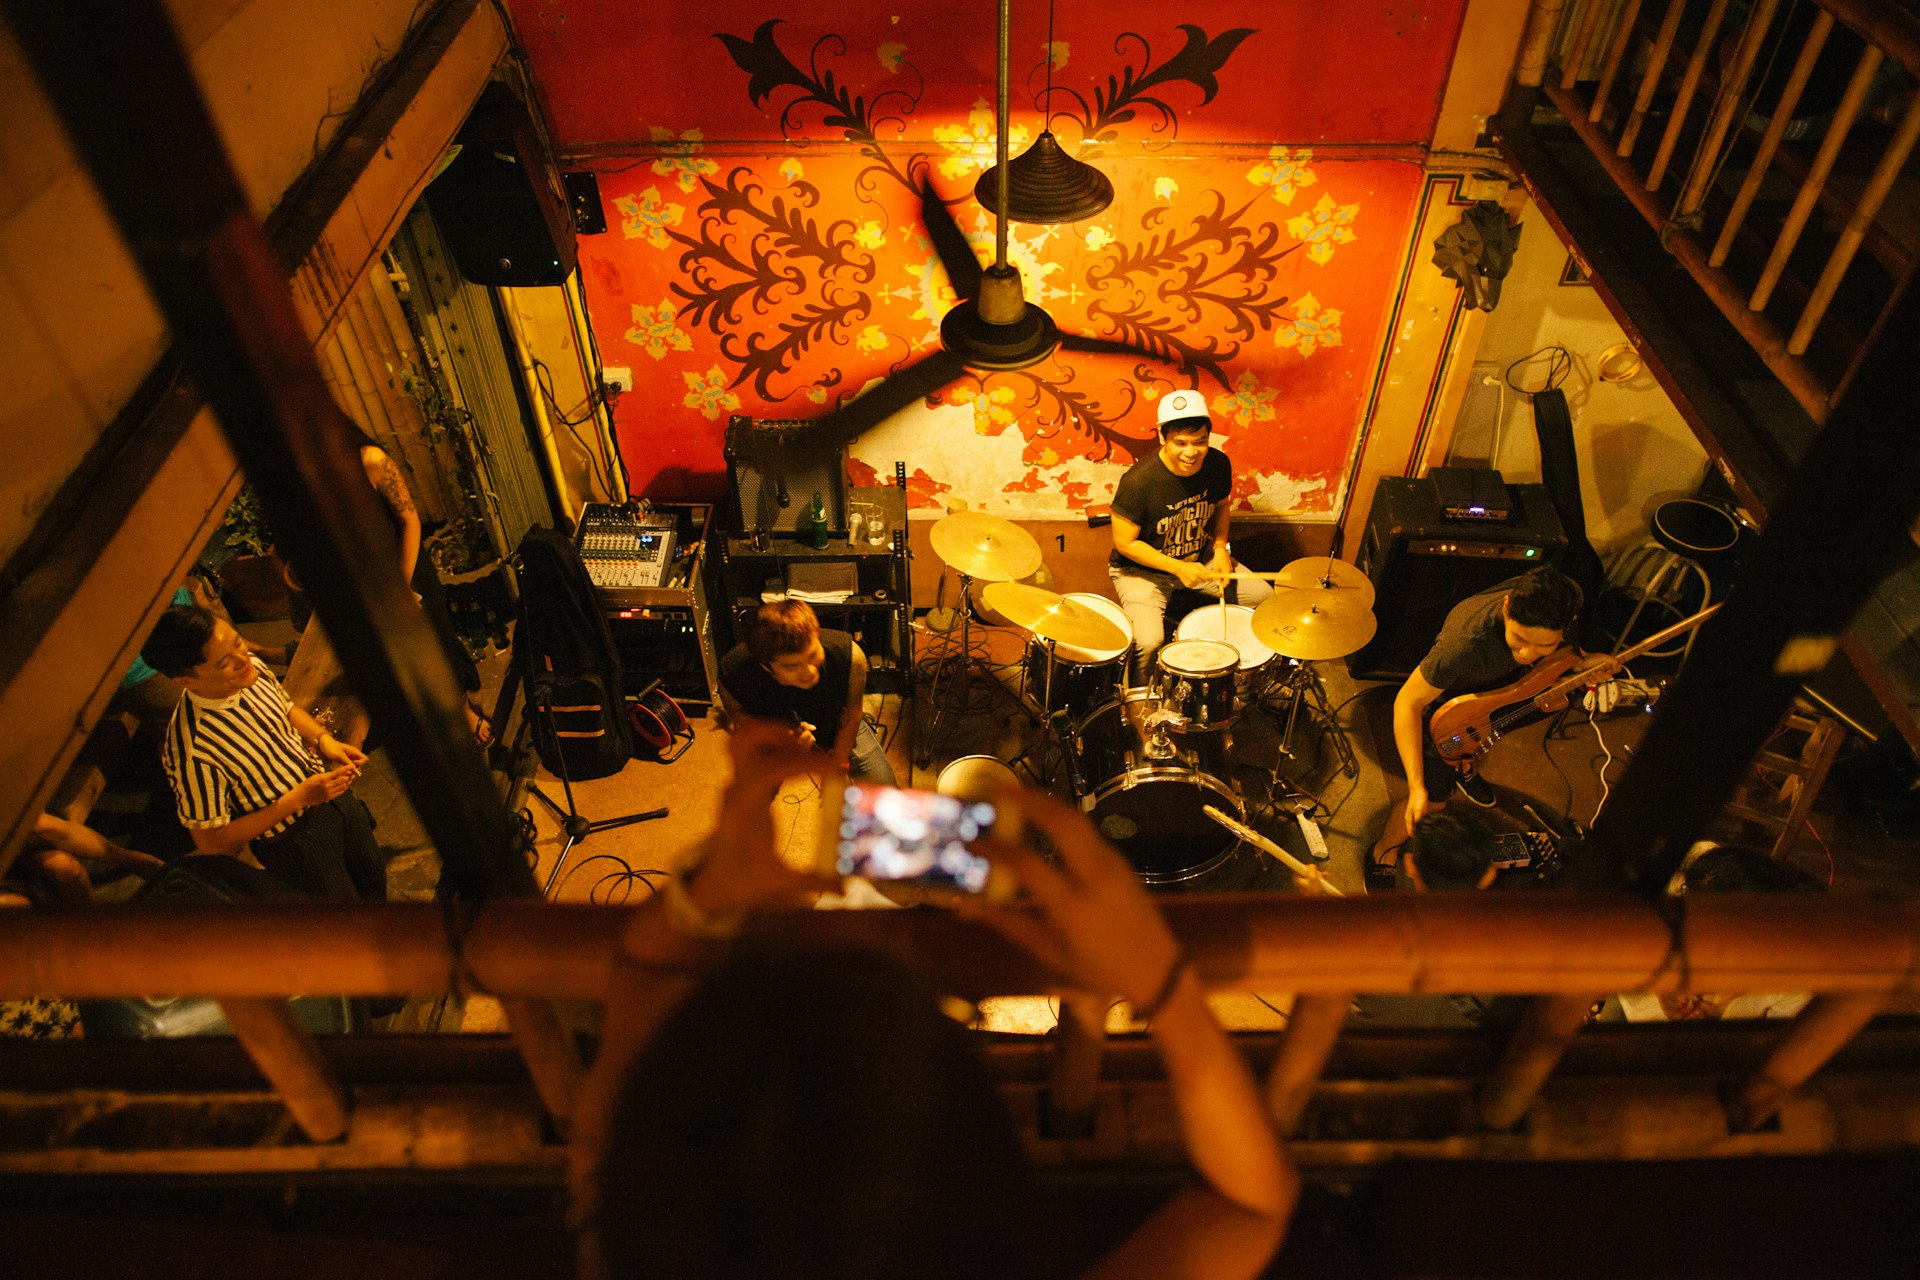 A gig-goer is standing on a balcony and taking a photo of the band on stage below at North Gate Jazz Co-Op, Chiang Mai 